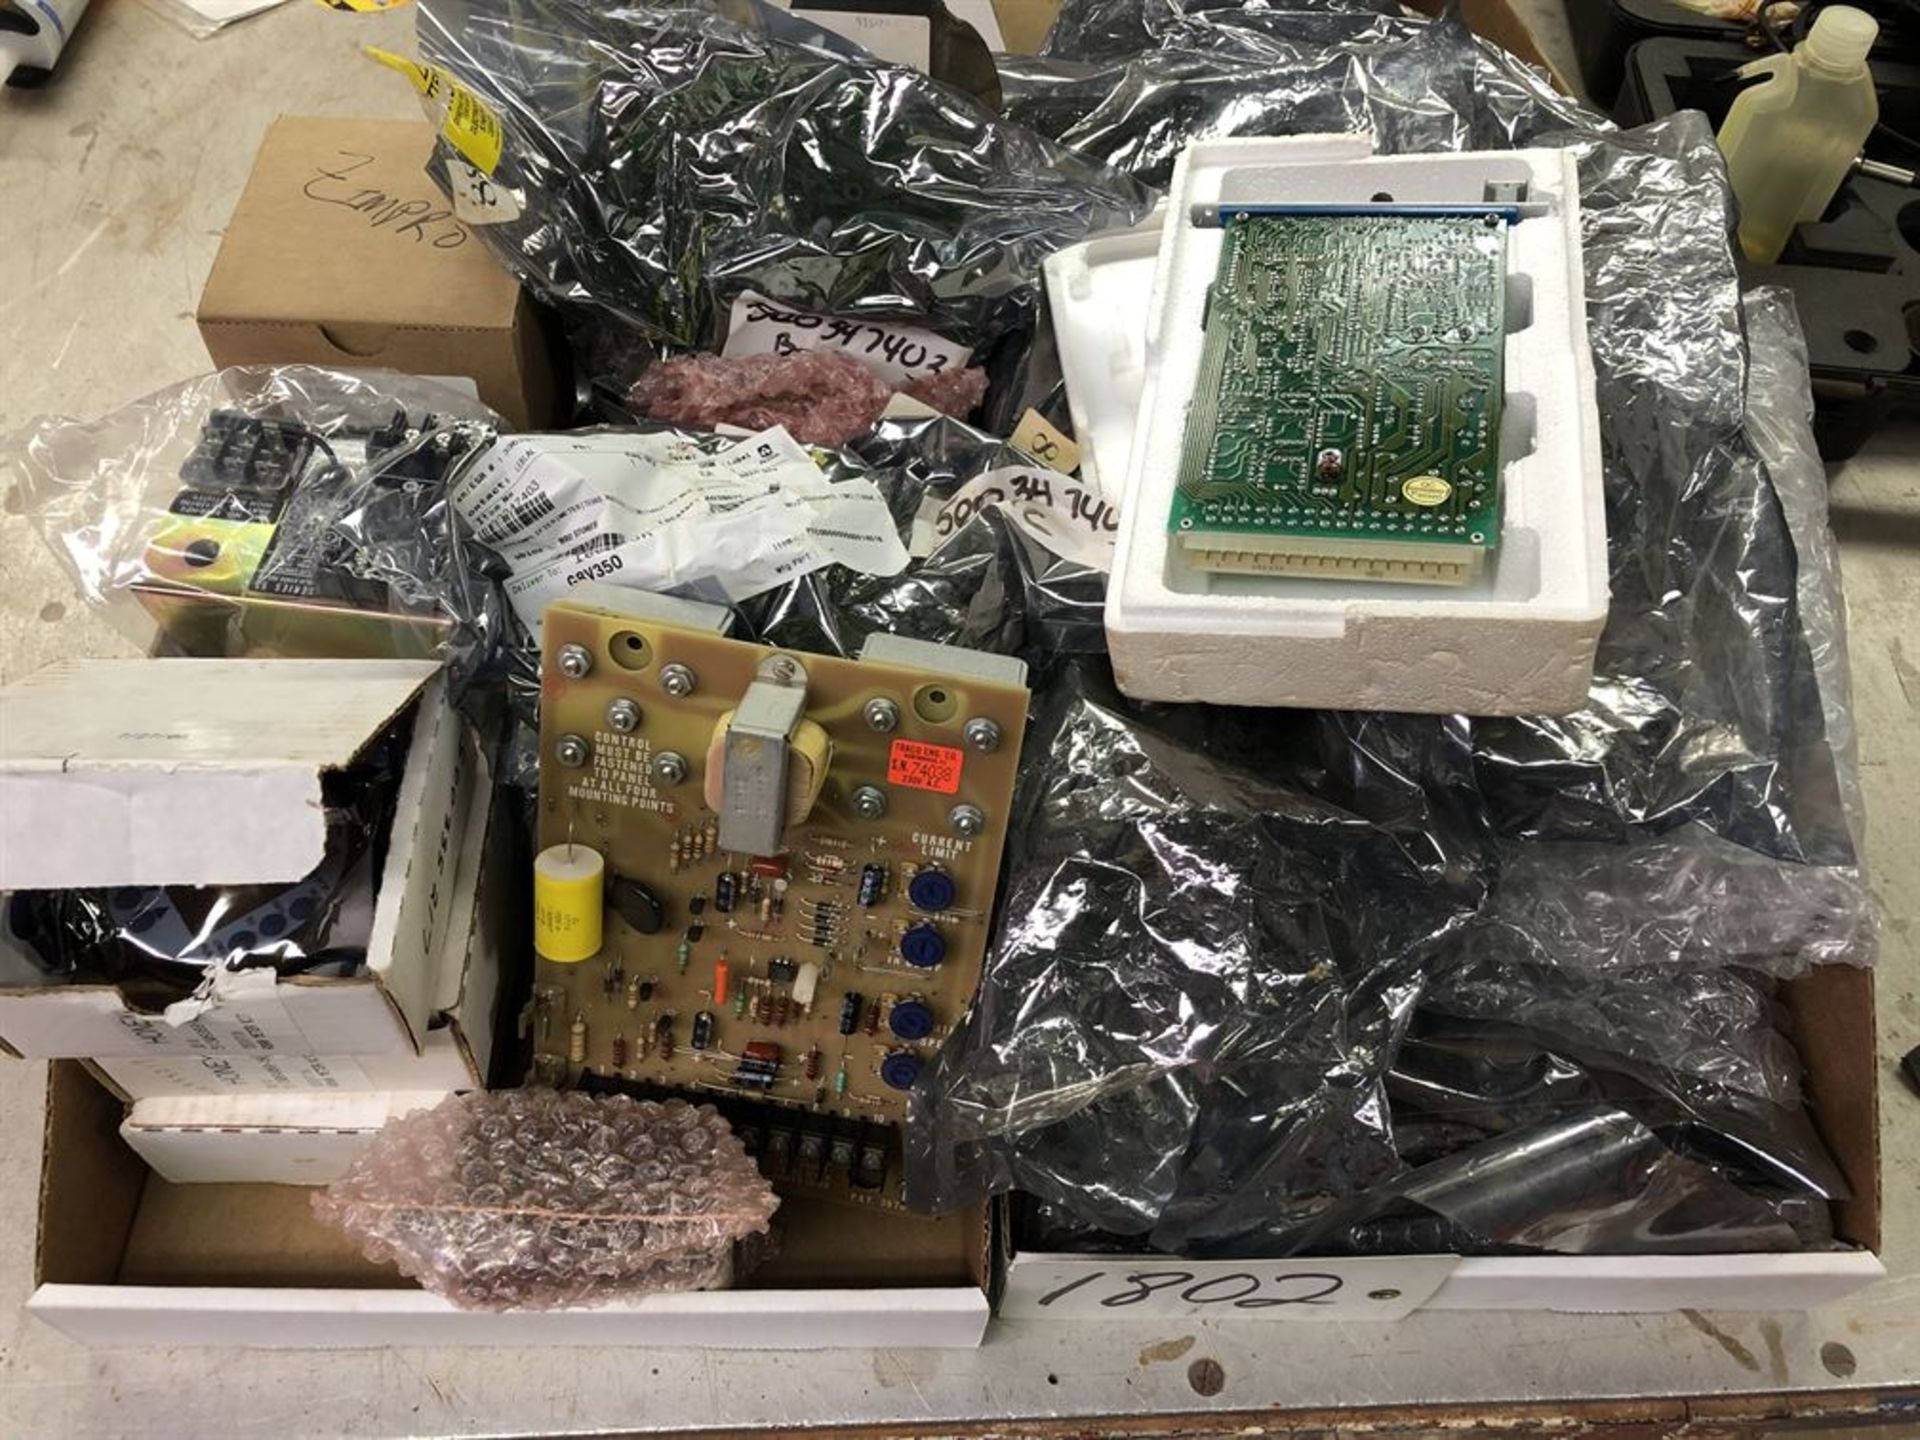 Lot Comprising of Assorted Circuit Boards (Location: Stir Building)